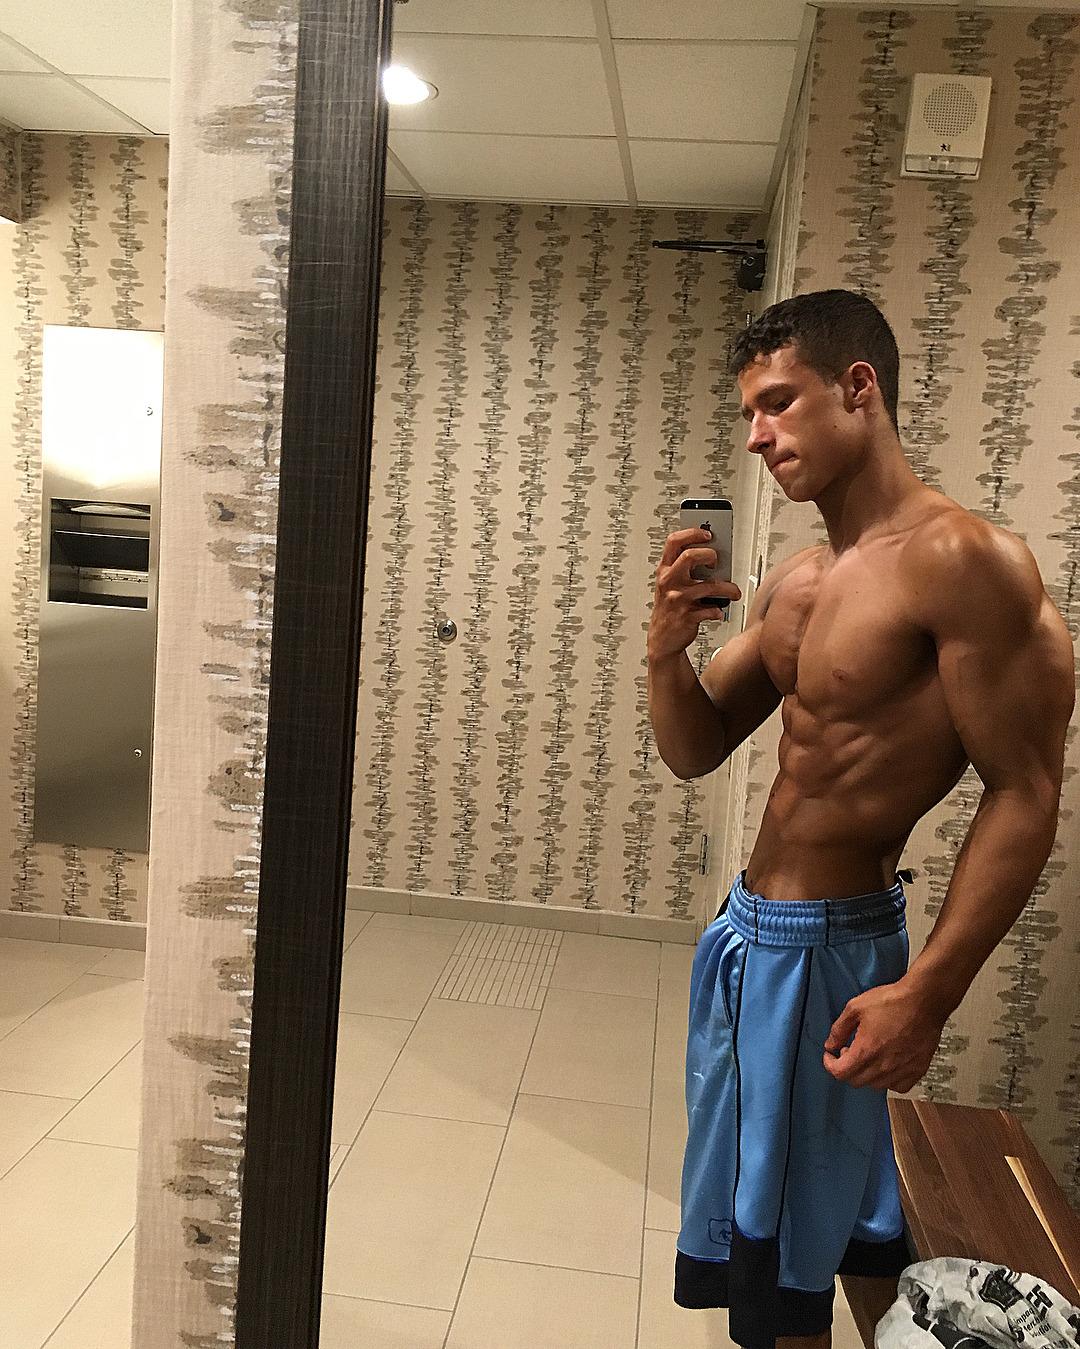 young-hunky-teen-bodybuilder-shirtless-fit-muscular-body-selfie-blue-shorts-big-biceps-sexy-tanned-bro